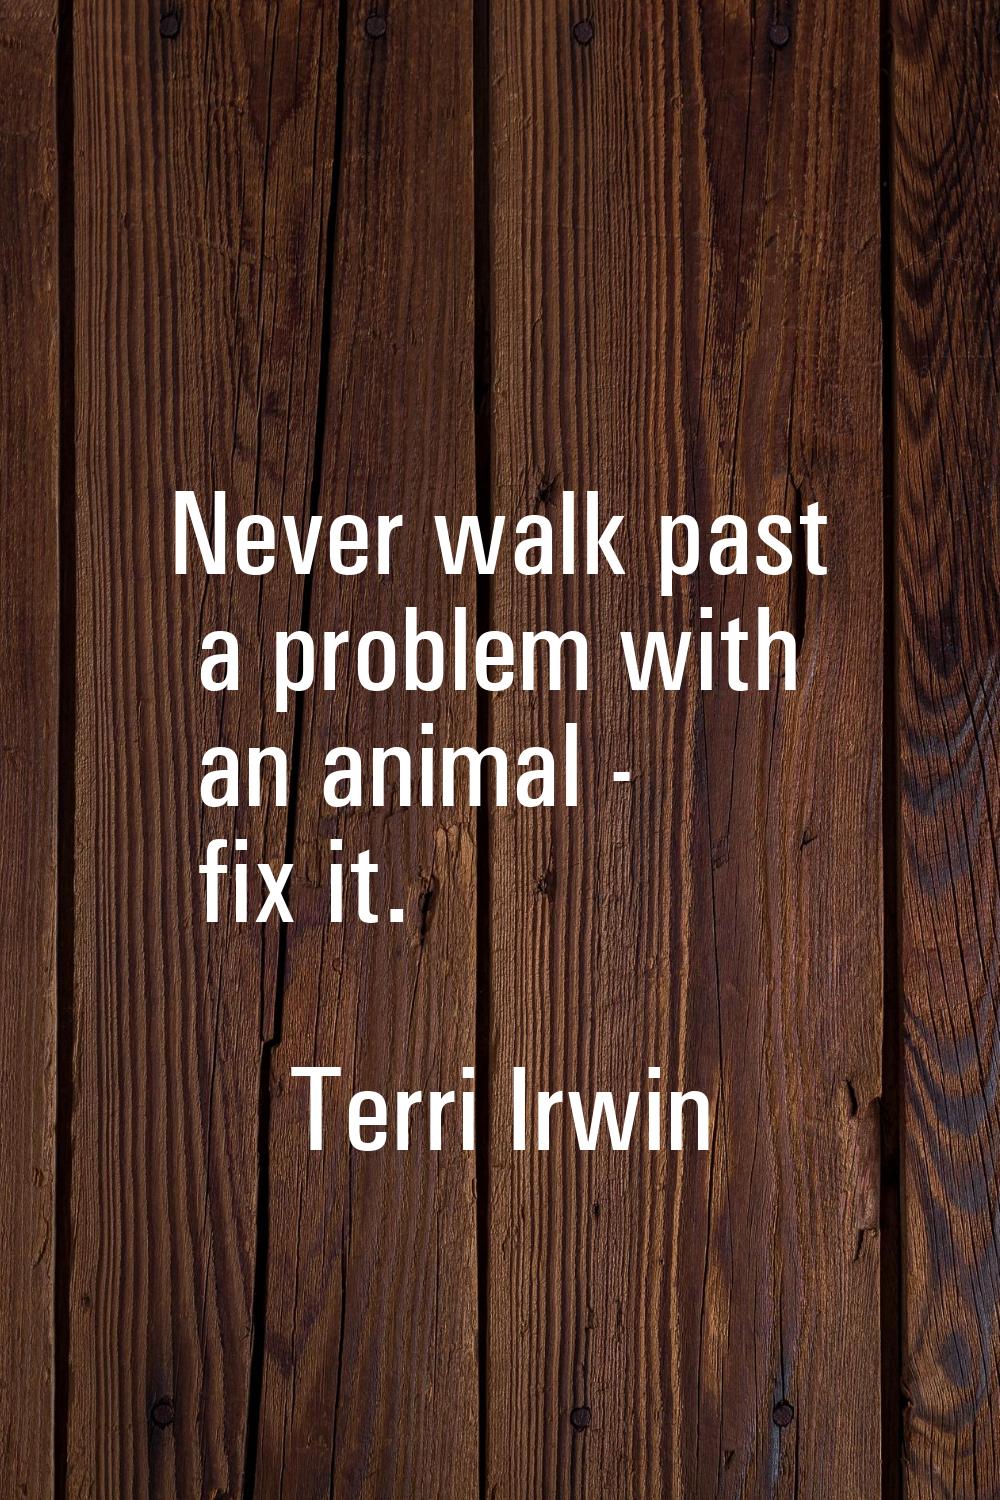 Never walk past a problem with an animal - fix it.